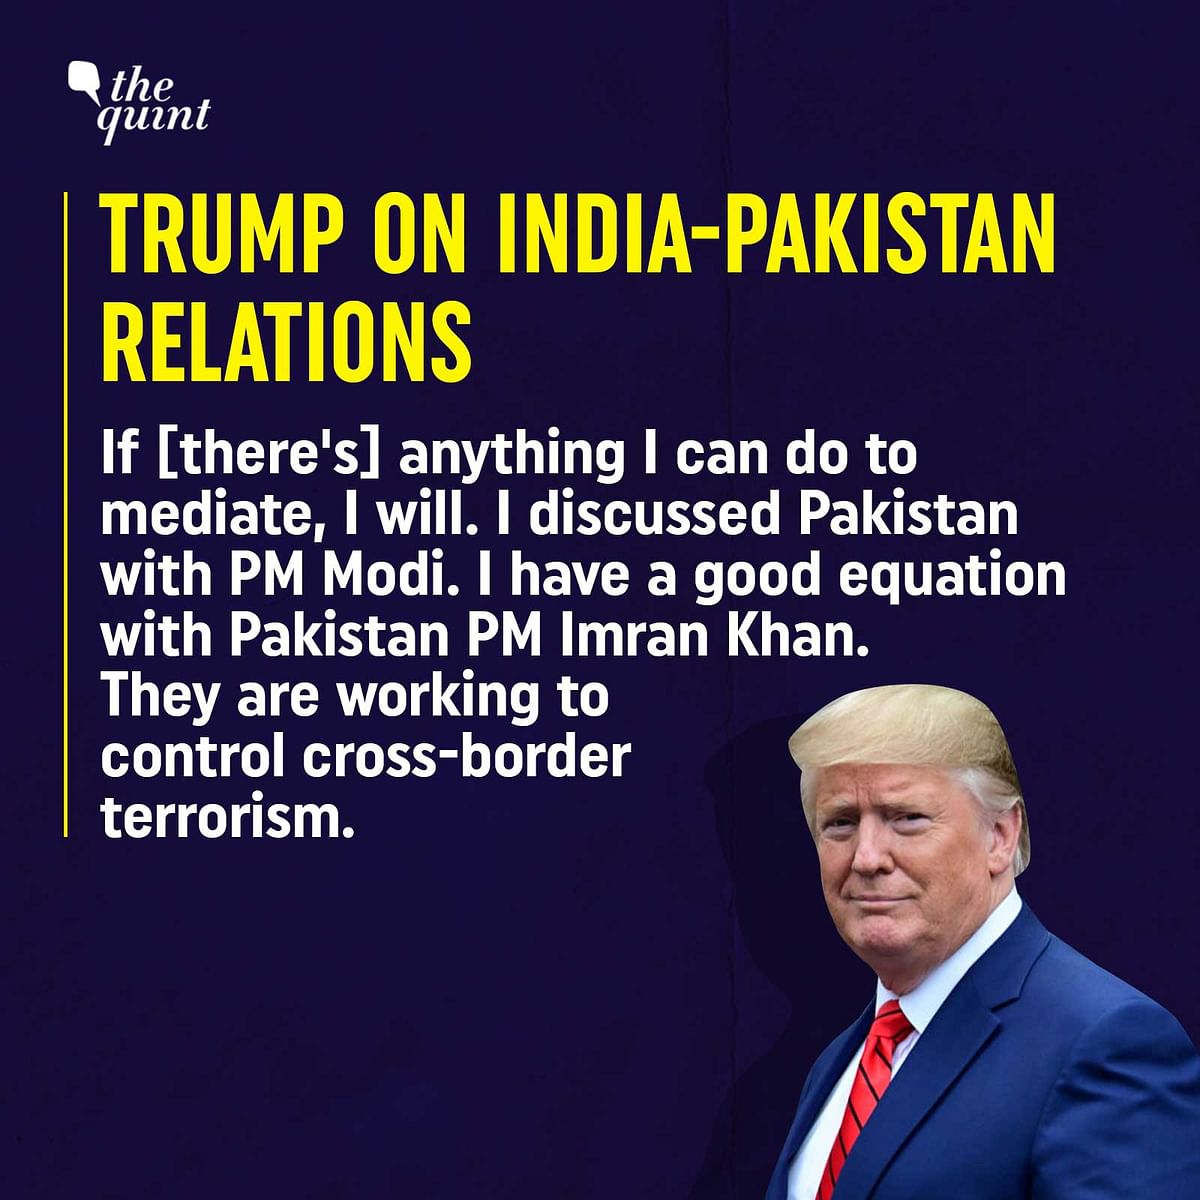 US President Donald Trump took questions from the media following a press briefing in New Delhi.